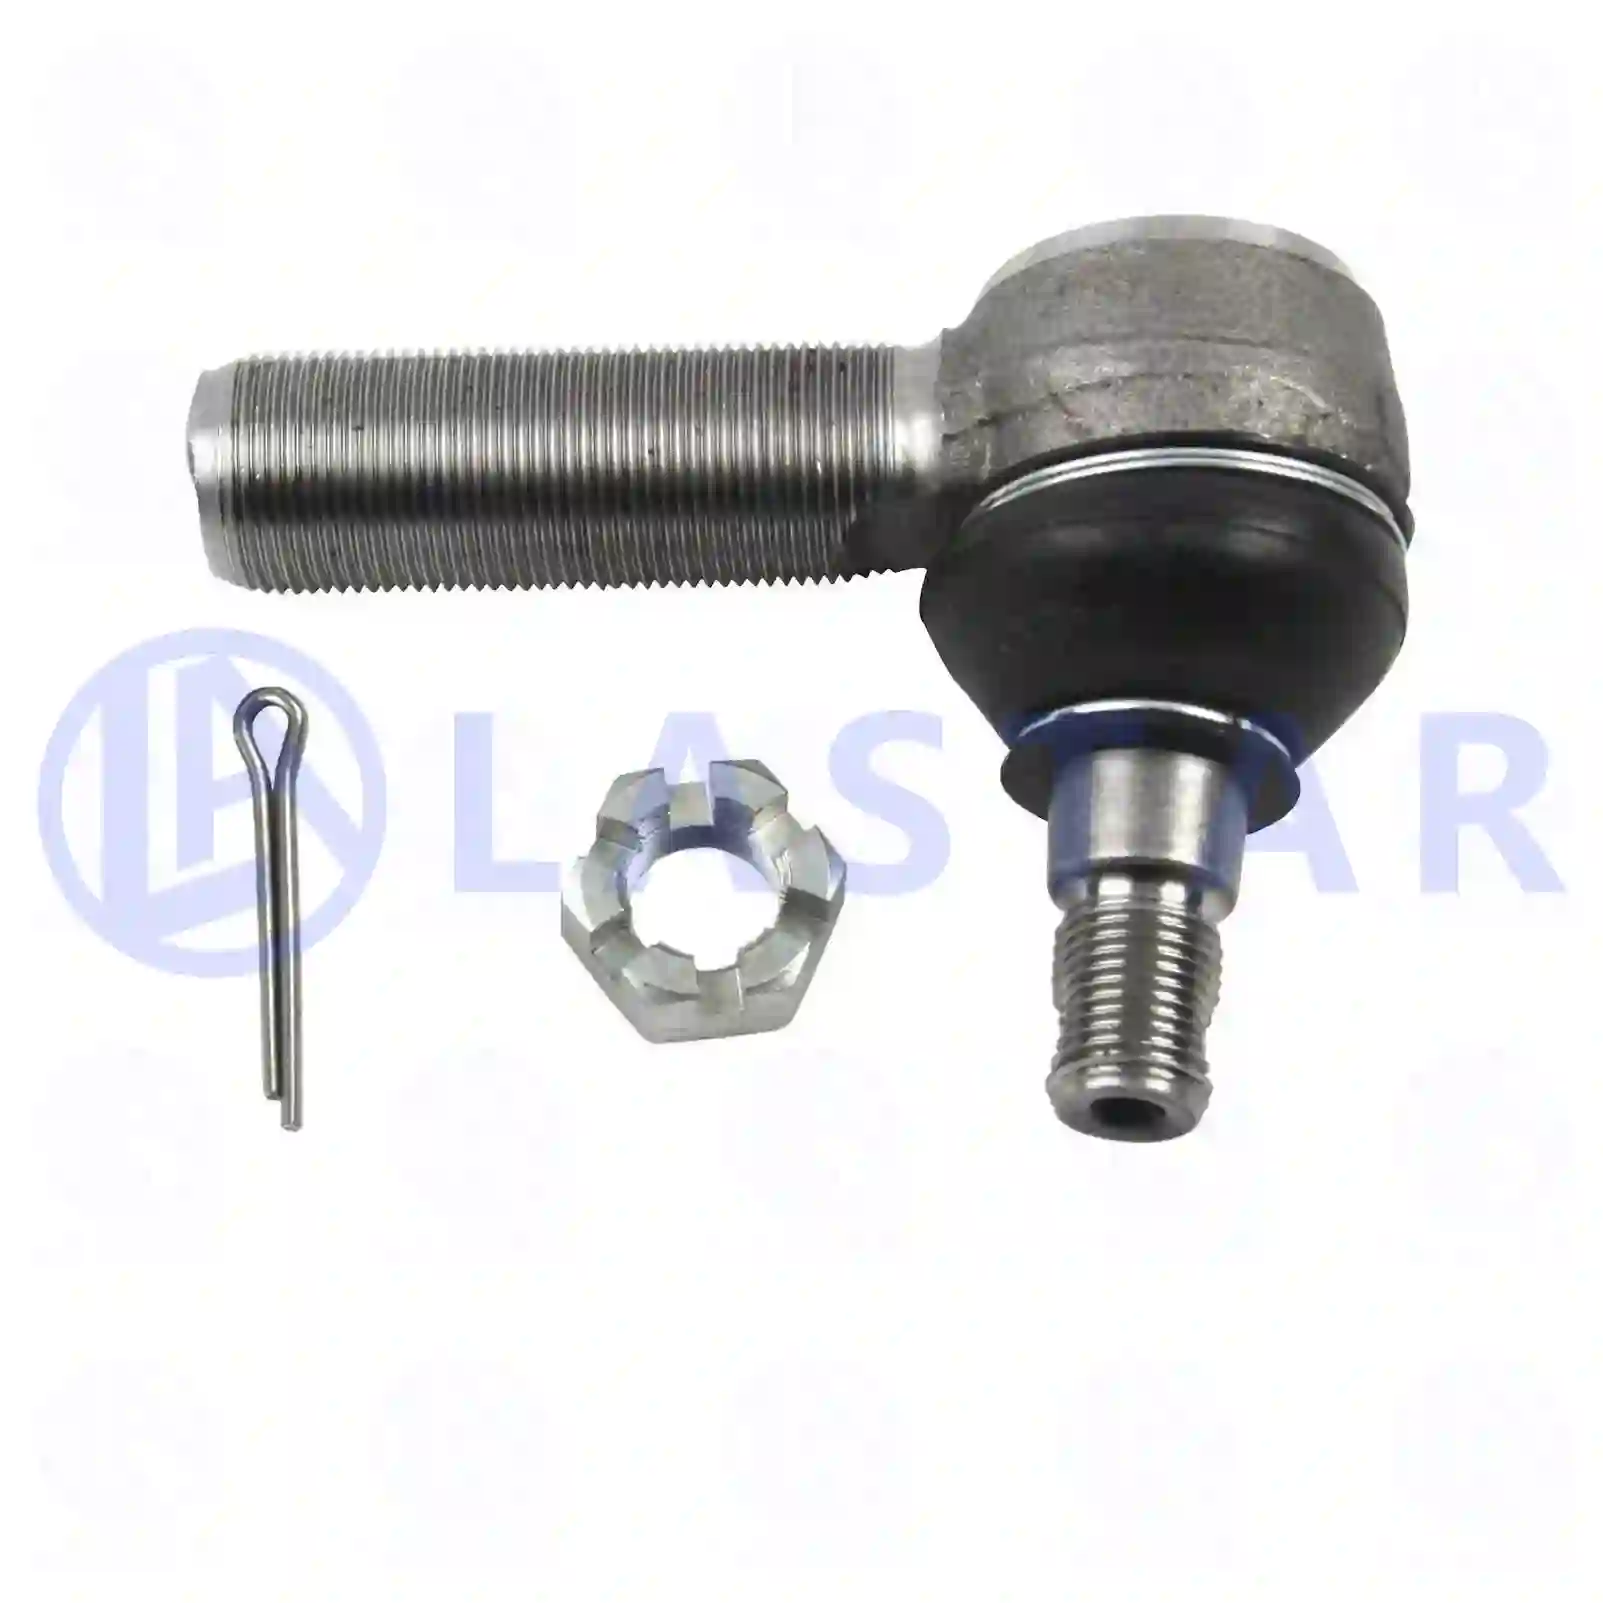 Ball joint, right hand thread, 77705350, 0608530, 608530, 42480024, 42491937, 5021446, 5021448, 6163543, 6792900, 42480024, 42491937, 81953010077, 81953010388, 81953016134, 81953016142, 81953016303, 81953016321, 85400002447, 85400002448, 85400003302, 88953016004, 0003300335, 0003300635, 0003302410, 0003306735, 0003308535, 0003308735, 0003382410, 0003384110, 0004607248, 0004633229, 0013304835, 0024601648, 4603301235, 6313380510, 0003406252, 5000514097, 5000807554, 5000814097, 5001844136, 5001860123, 5001860770, 1190778, 1517449, 1518142, ZG40371-0008 ||  77705350 Lastar Spare Part | Truck Spare Parts, Auotomotive Spare Parts Ball joint, right hand thread, 77705350, 0608530, 608530, 42480024, 42491937, 5021446, 5021448, 6163543, 6792900, 42480024, 42491937, 81953010077, 81953010388, 81953016134, 81953016142, 81953016303, 81953016321, 85400002447, 85400002448, 85400003302, 88953016004, 0003300335, 0003300635, 0003302410, 0003306735, 0003308535, 0003308735, 0003382410, 0003384110, 0004607248, 0004633229, 0013304835, 0024601648, 4603301235, 6313380510, 0003406252, 5000514097, 5000807554, 5000814097, 5001844136, 5001860123, 5001860770, 1190778, 1517449, 1518142, ZG40371-0008 ||  77705350 Lastar Spare Part | Truck Spare Parts, Auotomotive Spare Parts